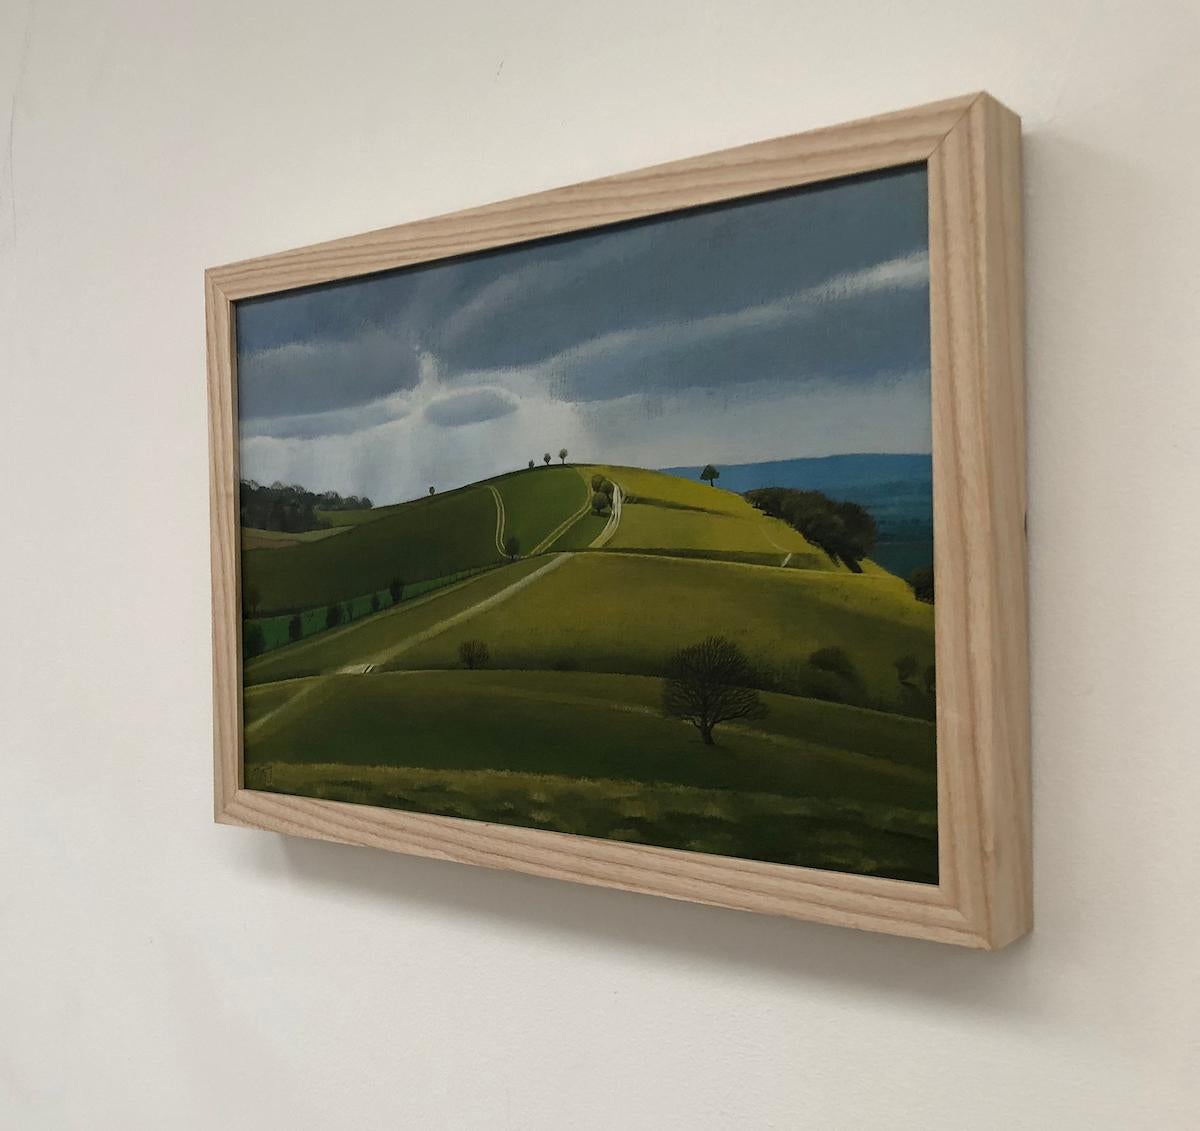 View from Pitstone Hill by Tim Woodcock-Jones [2019]
original and hand signed by the artist 
oil on canvas
Image size: H:23.5 cm x W:32 cm
Complete Size of Unframed Work: H:21 cm x W:30 cm x D:.5cm
Frame Size: H:23.5 cm x W:32 cm x D:3cm
Sold